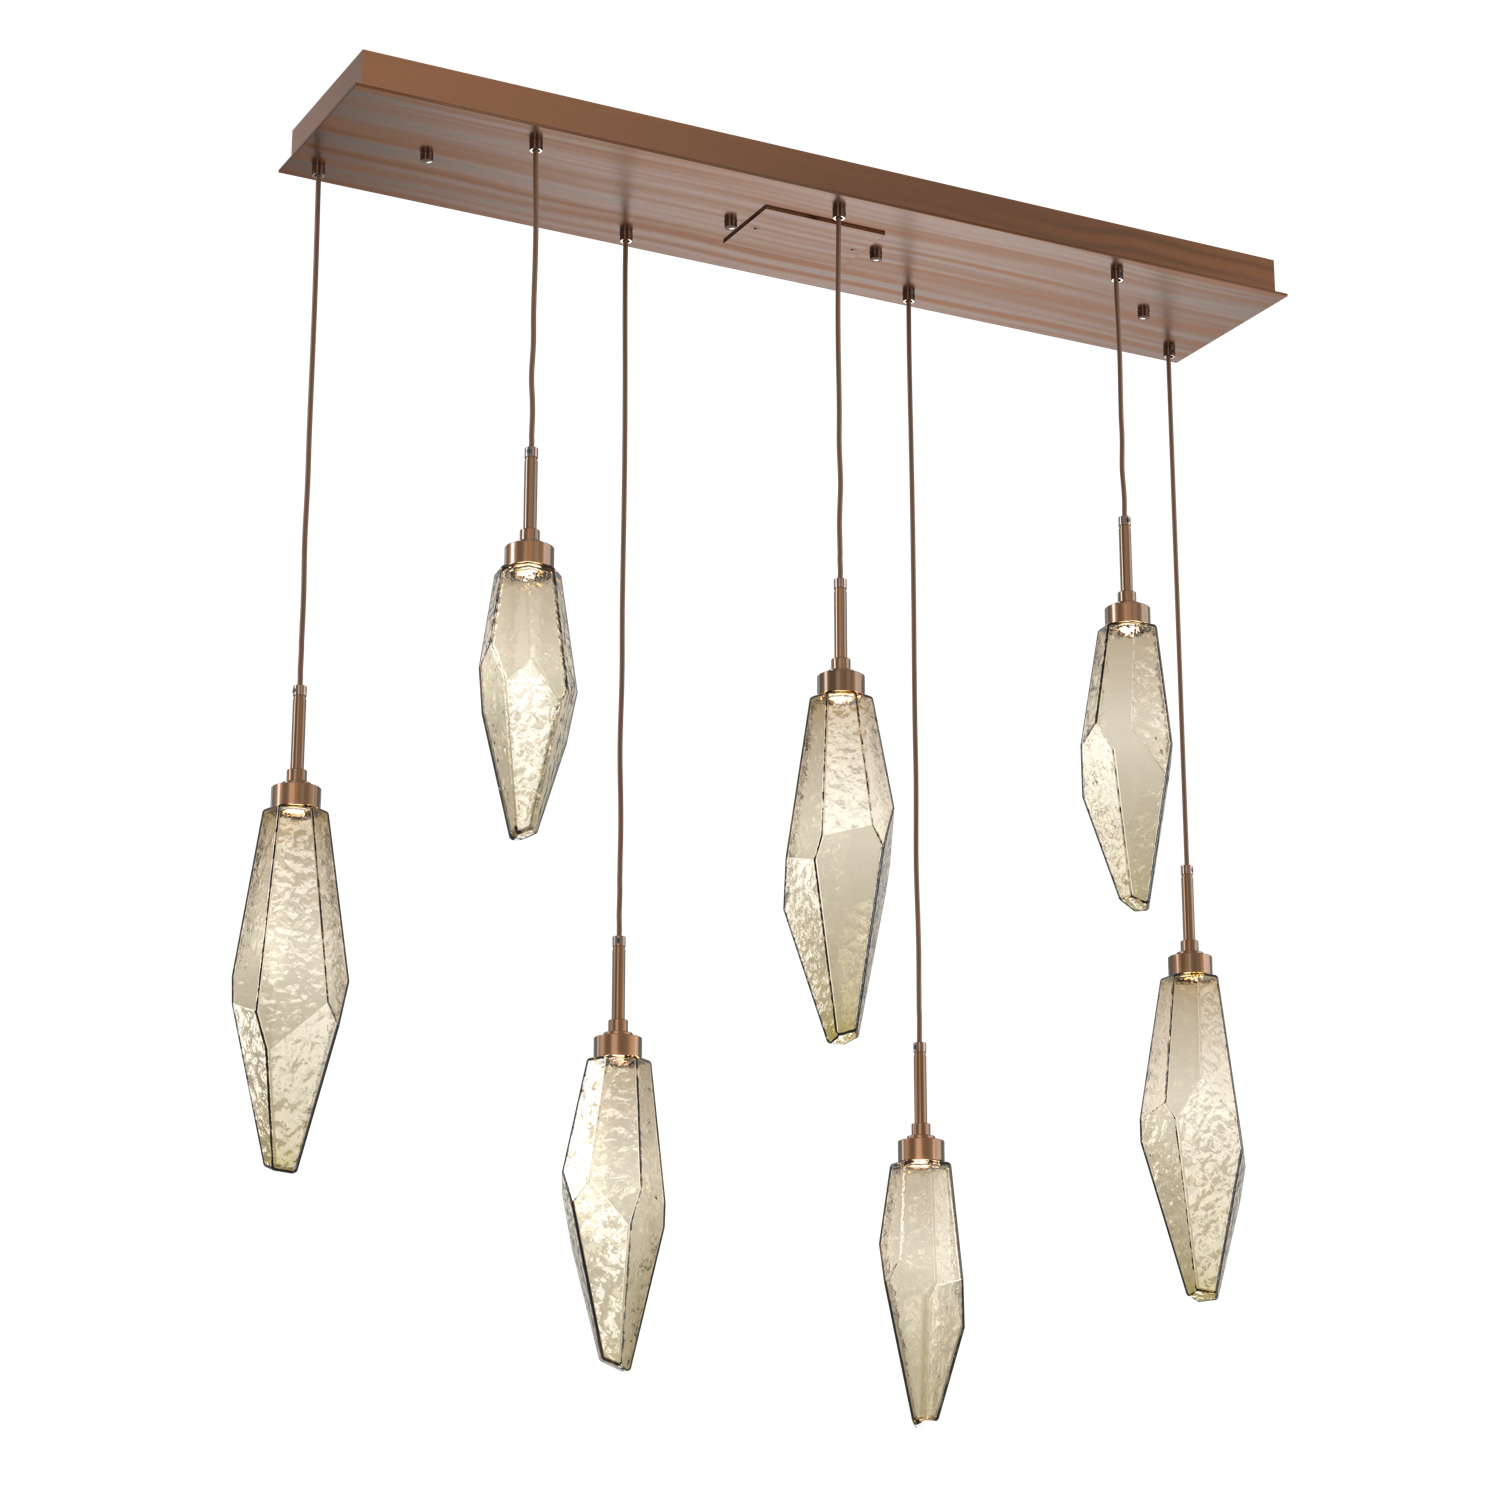 PLB0050-07-RB-CB-Hammerton-Studio-Rock-Crystal-7-light-linear-pendant-chandelier-with-oil-rubbed-bronze-finish-and-chilled-bronze-blown-glass-shades-and-LED-lamping